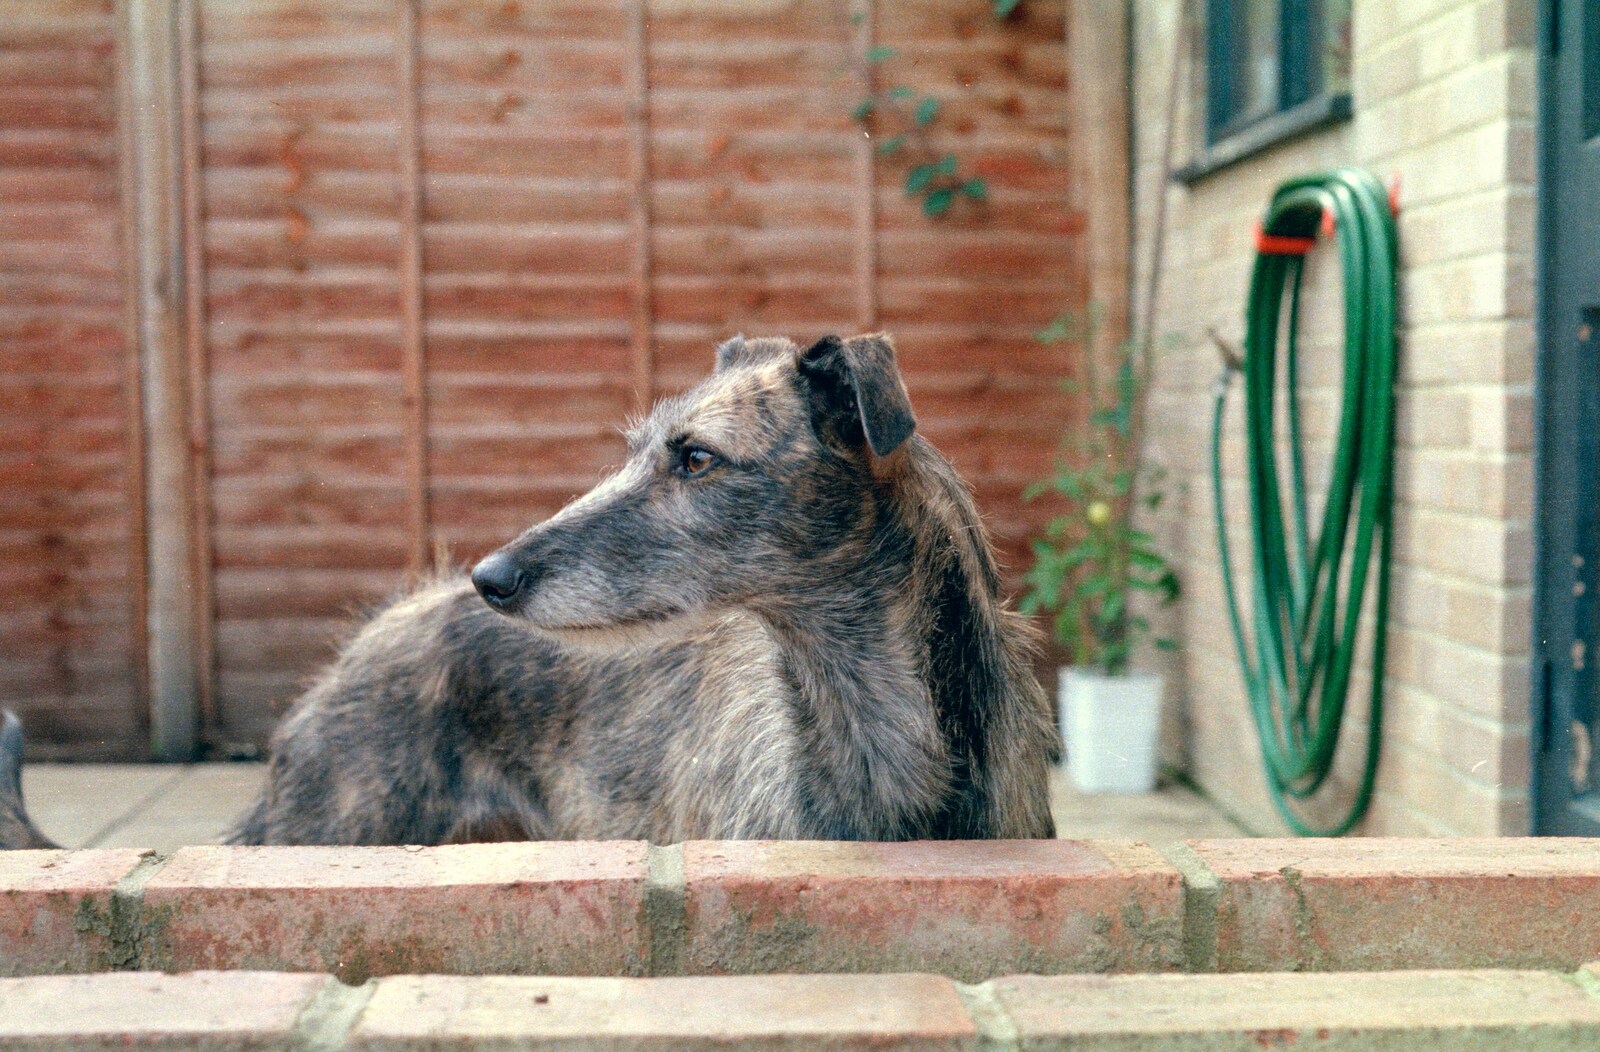 Another dog next door from Harvester Way Randomness, Lymington, Hampshire - 19th July 1986